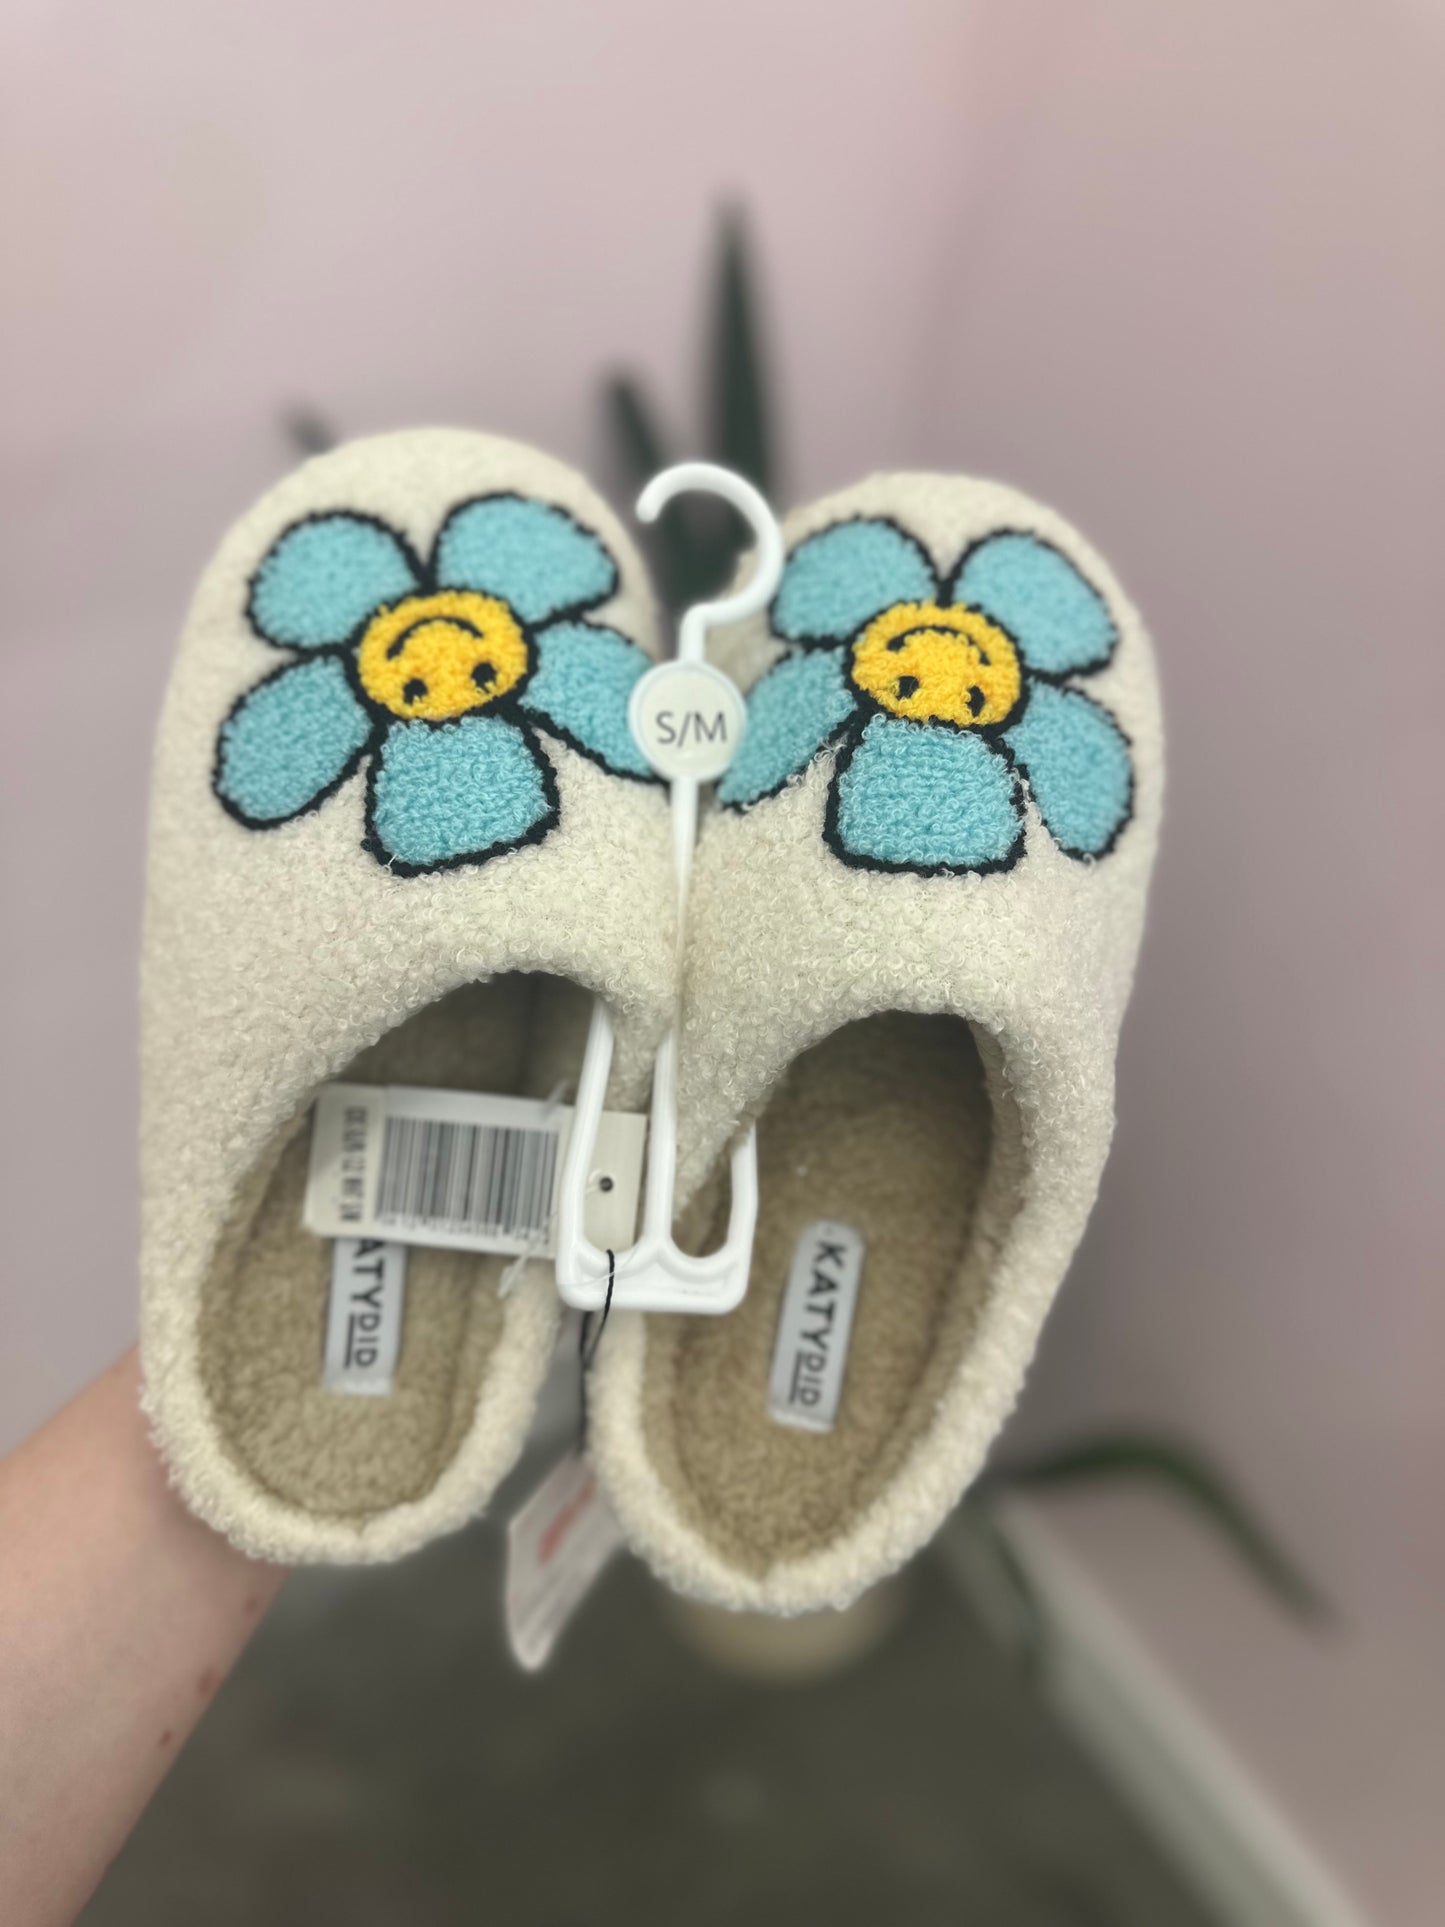 Daisy Smile Slippers - Size 6/7